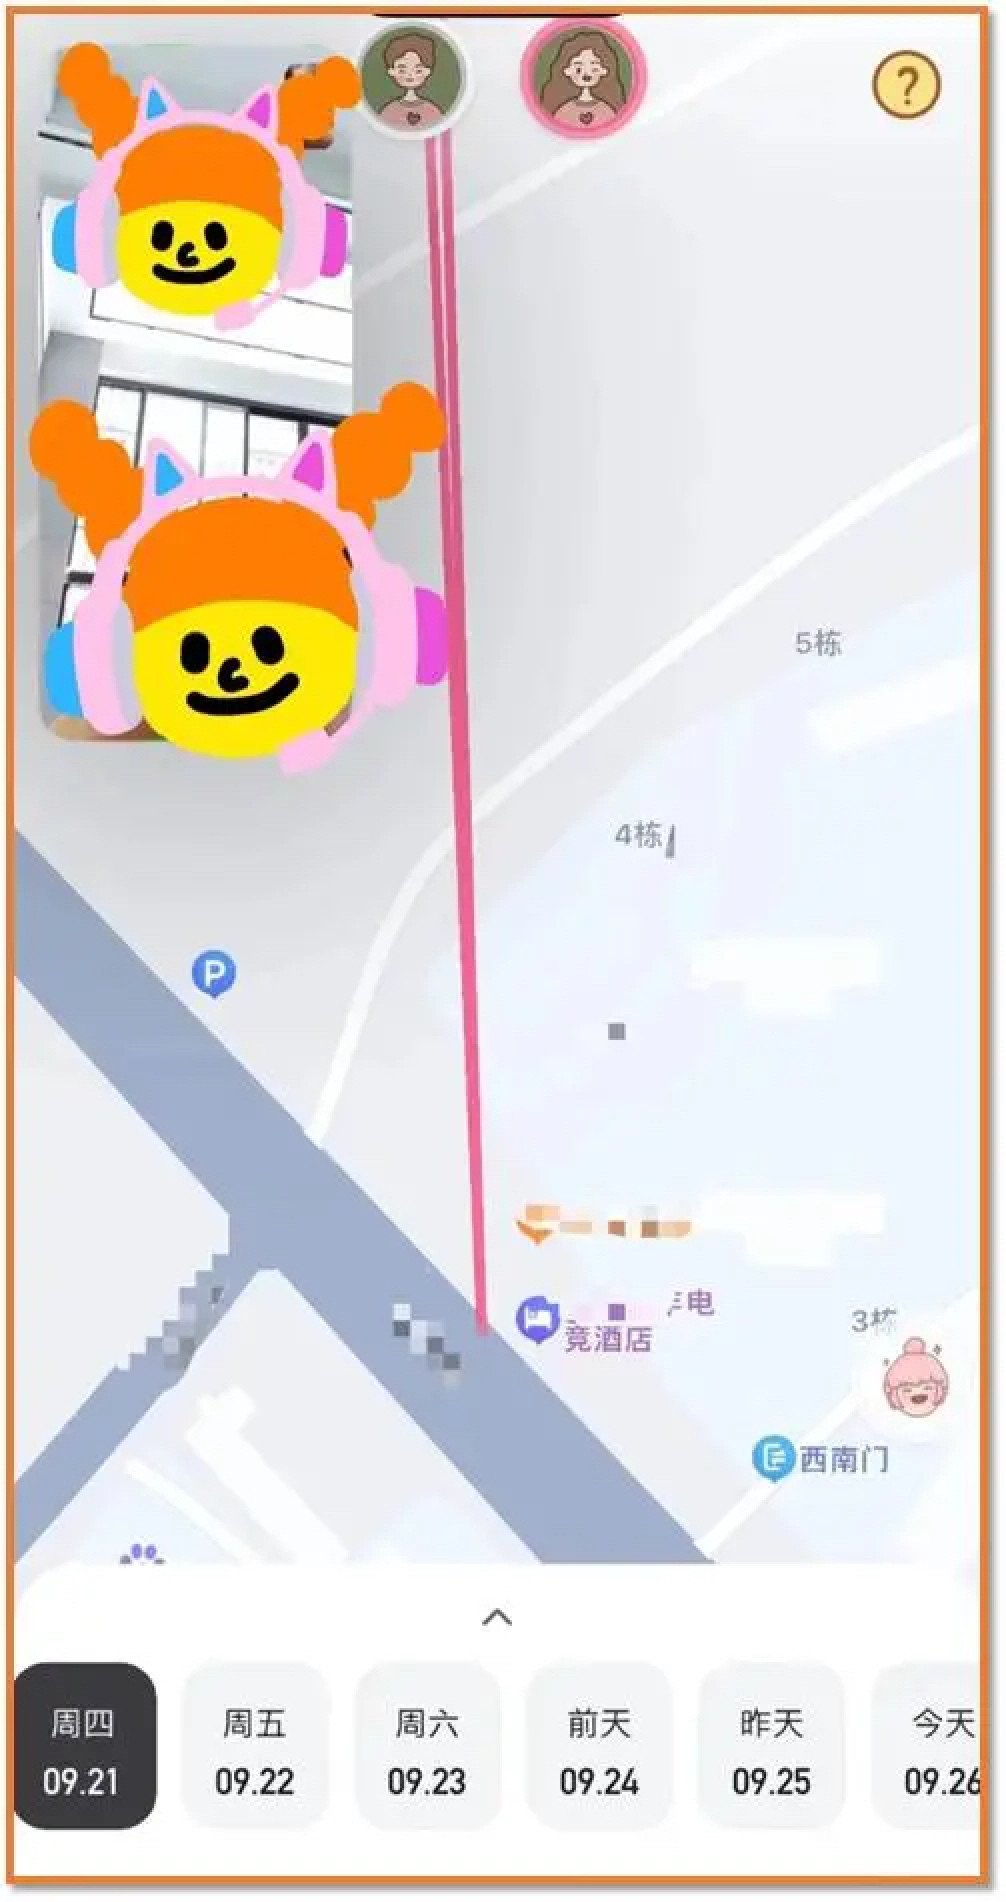 ‘relationship surveillance tool’: china dating apps launch location tracking for couples to monitor each other, claim it enhances trust, security